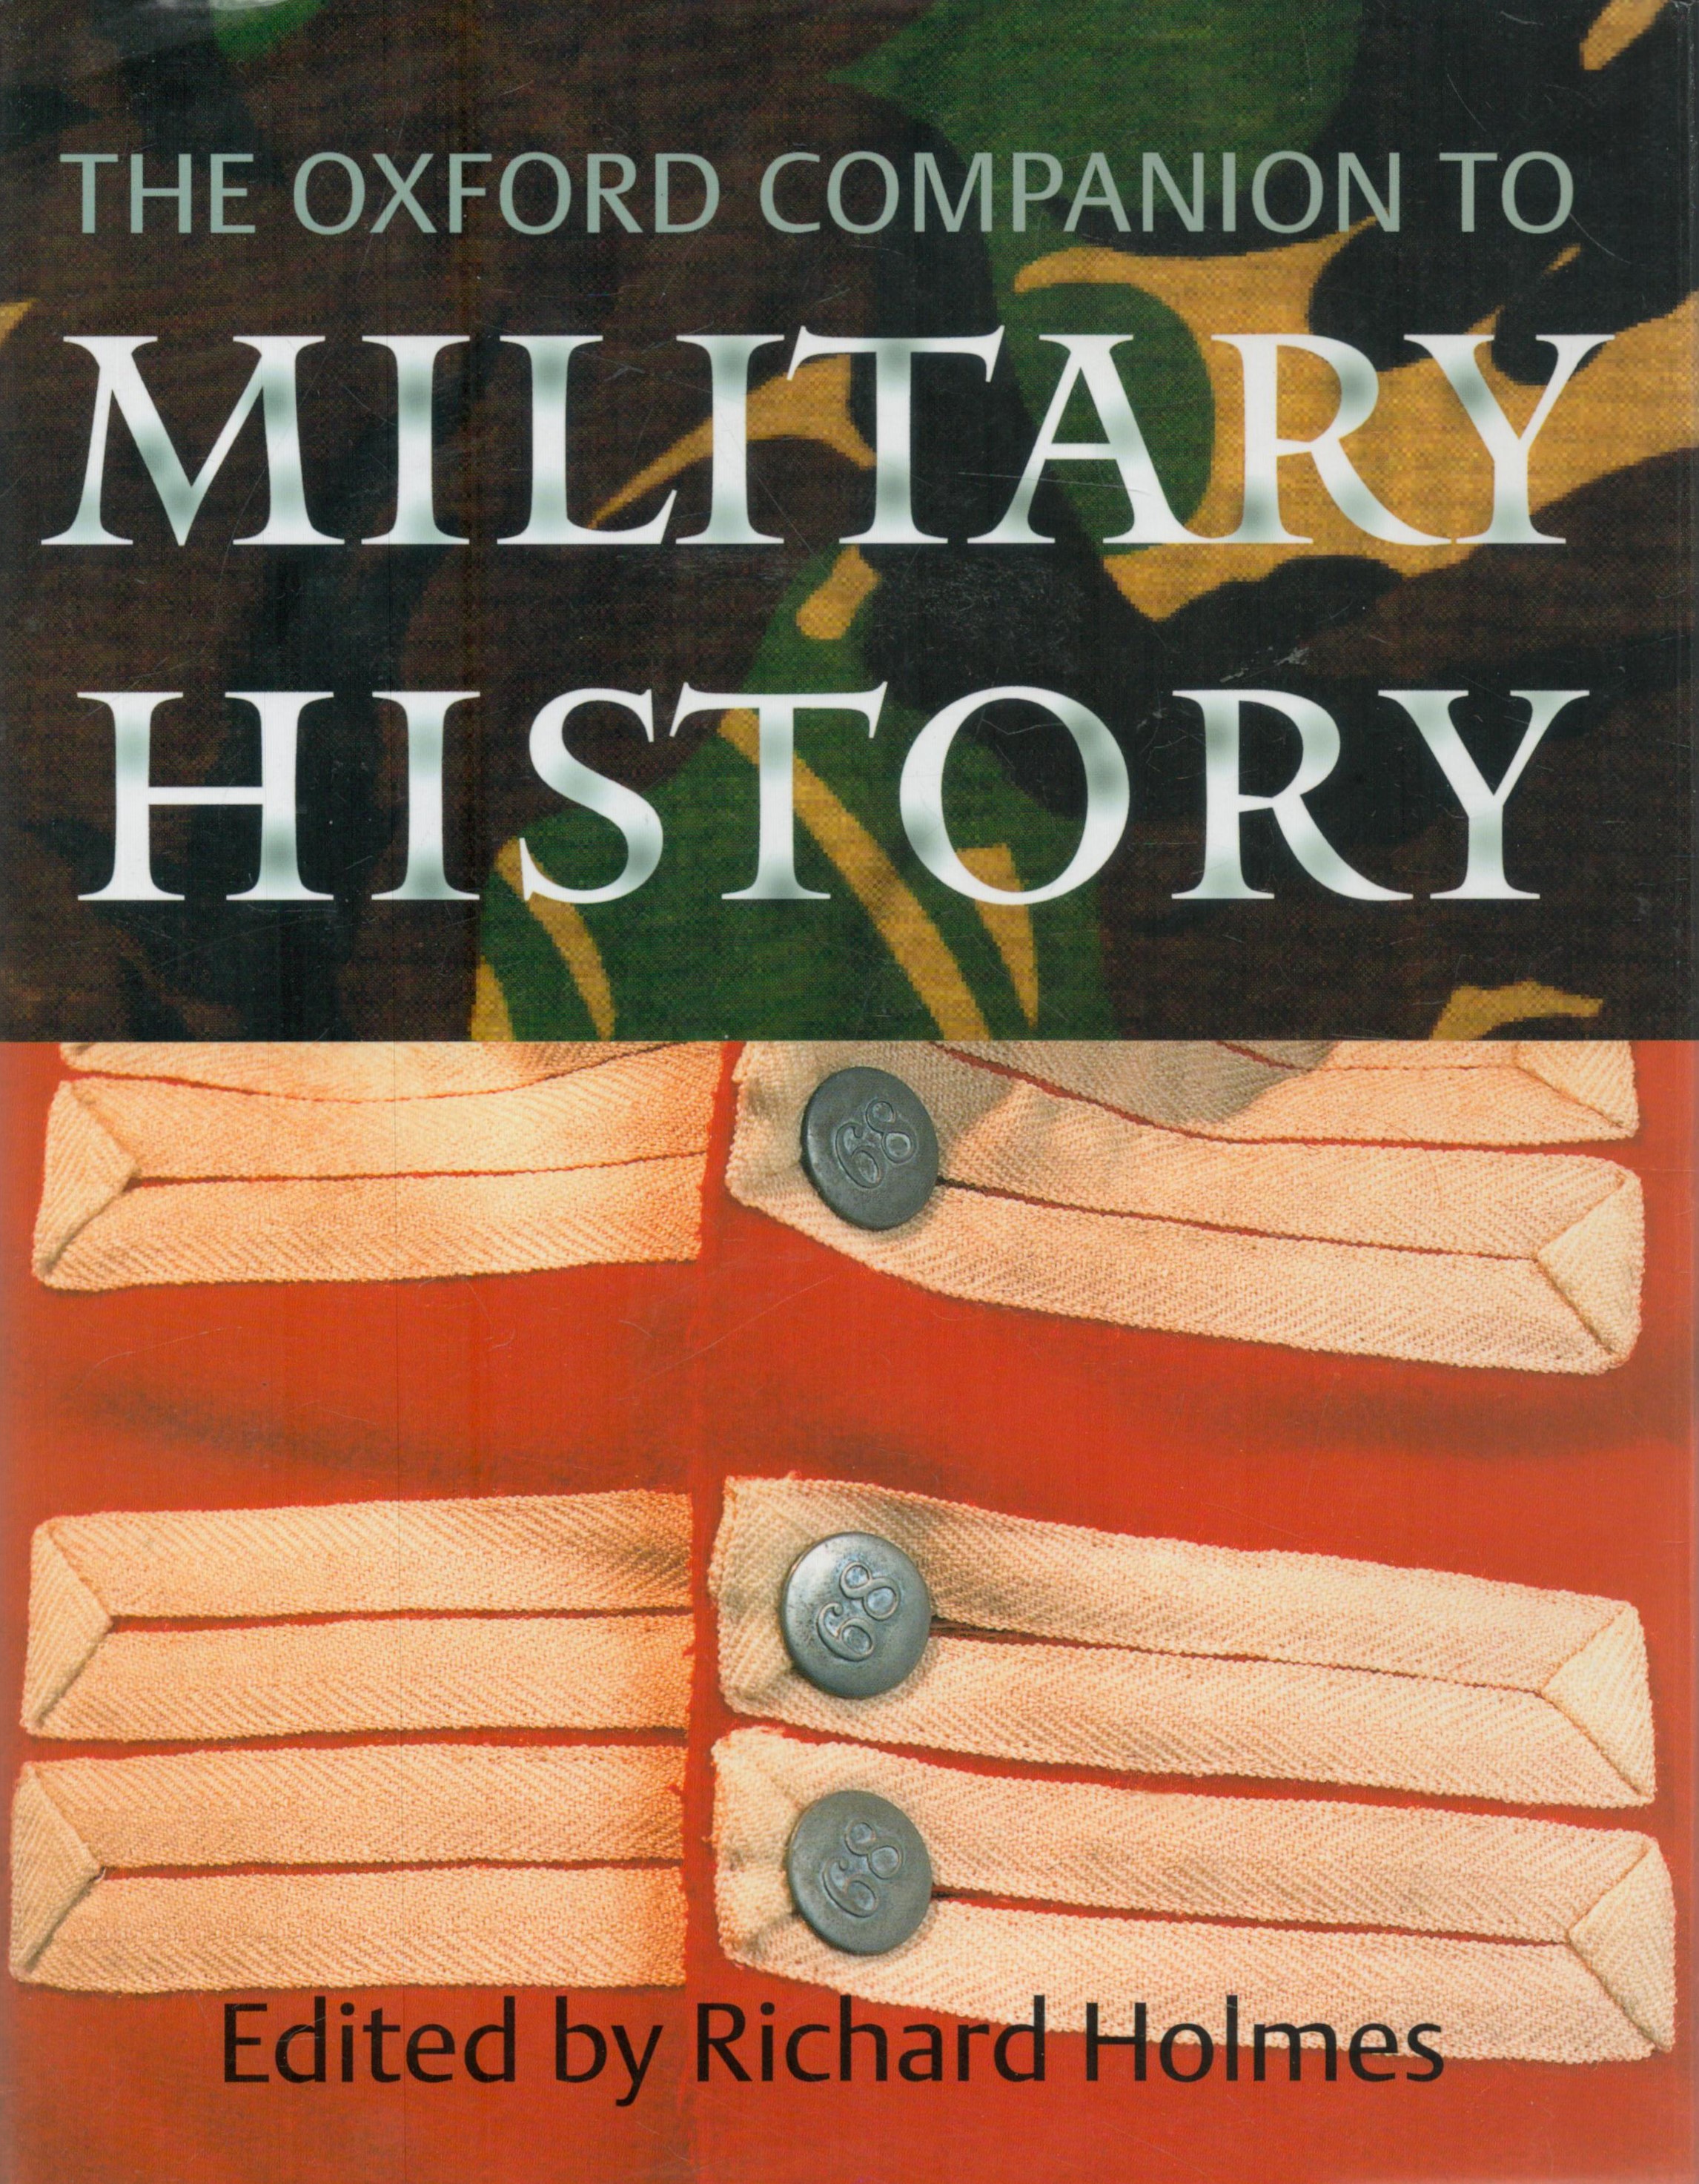 The Oxford Companion to Military History edited and signed by Richard Holmes. First Edition hardback